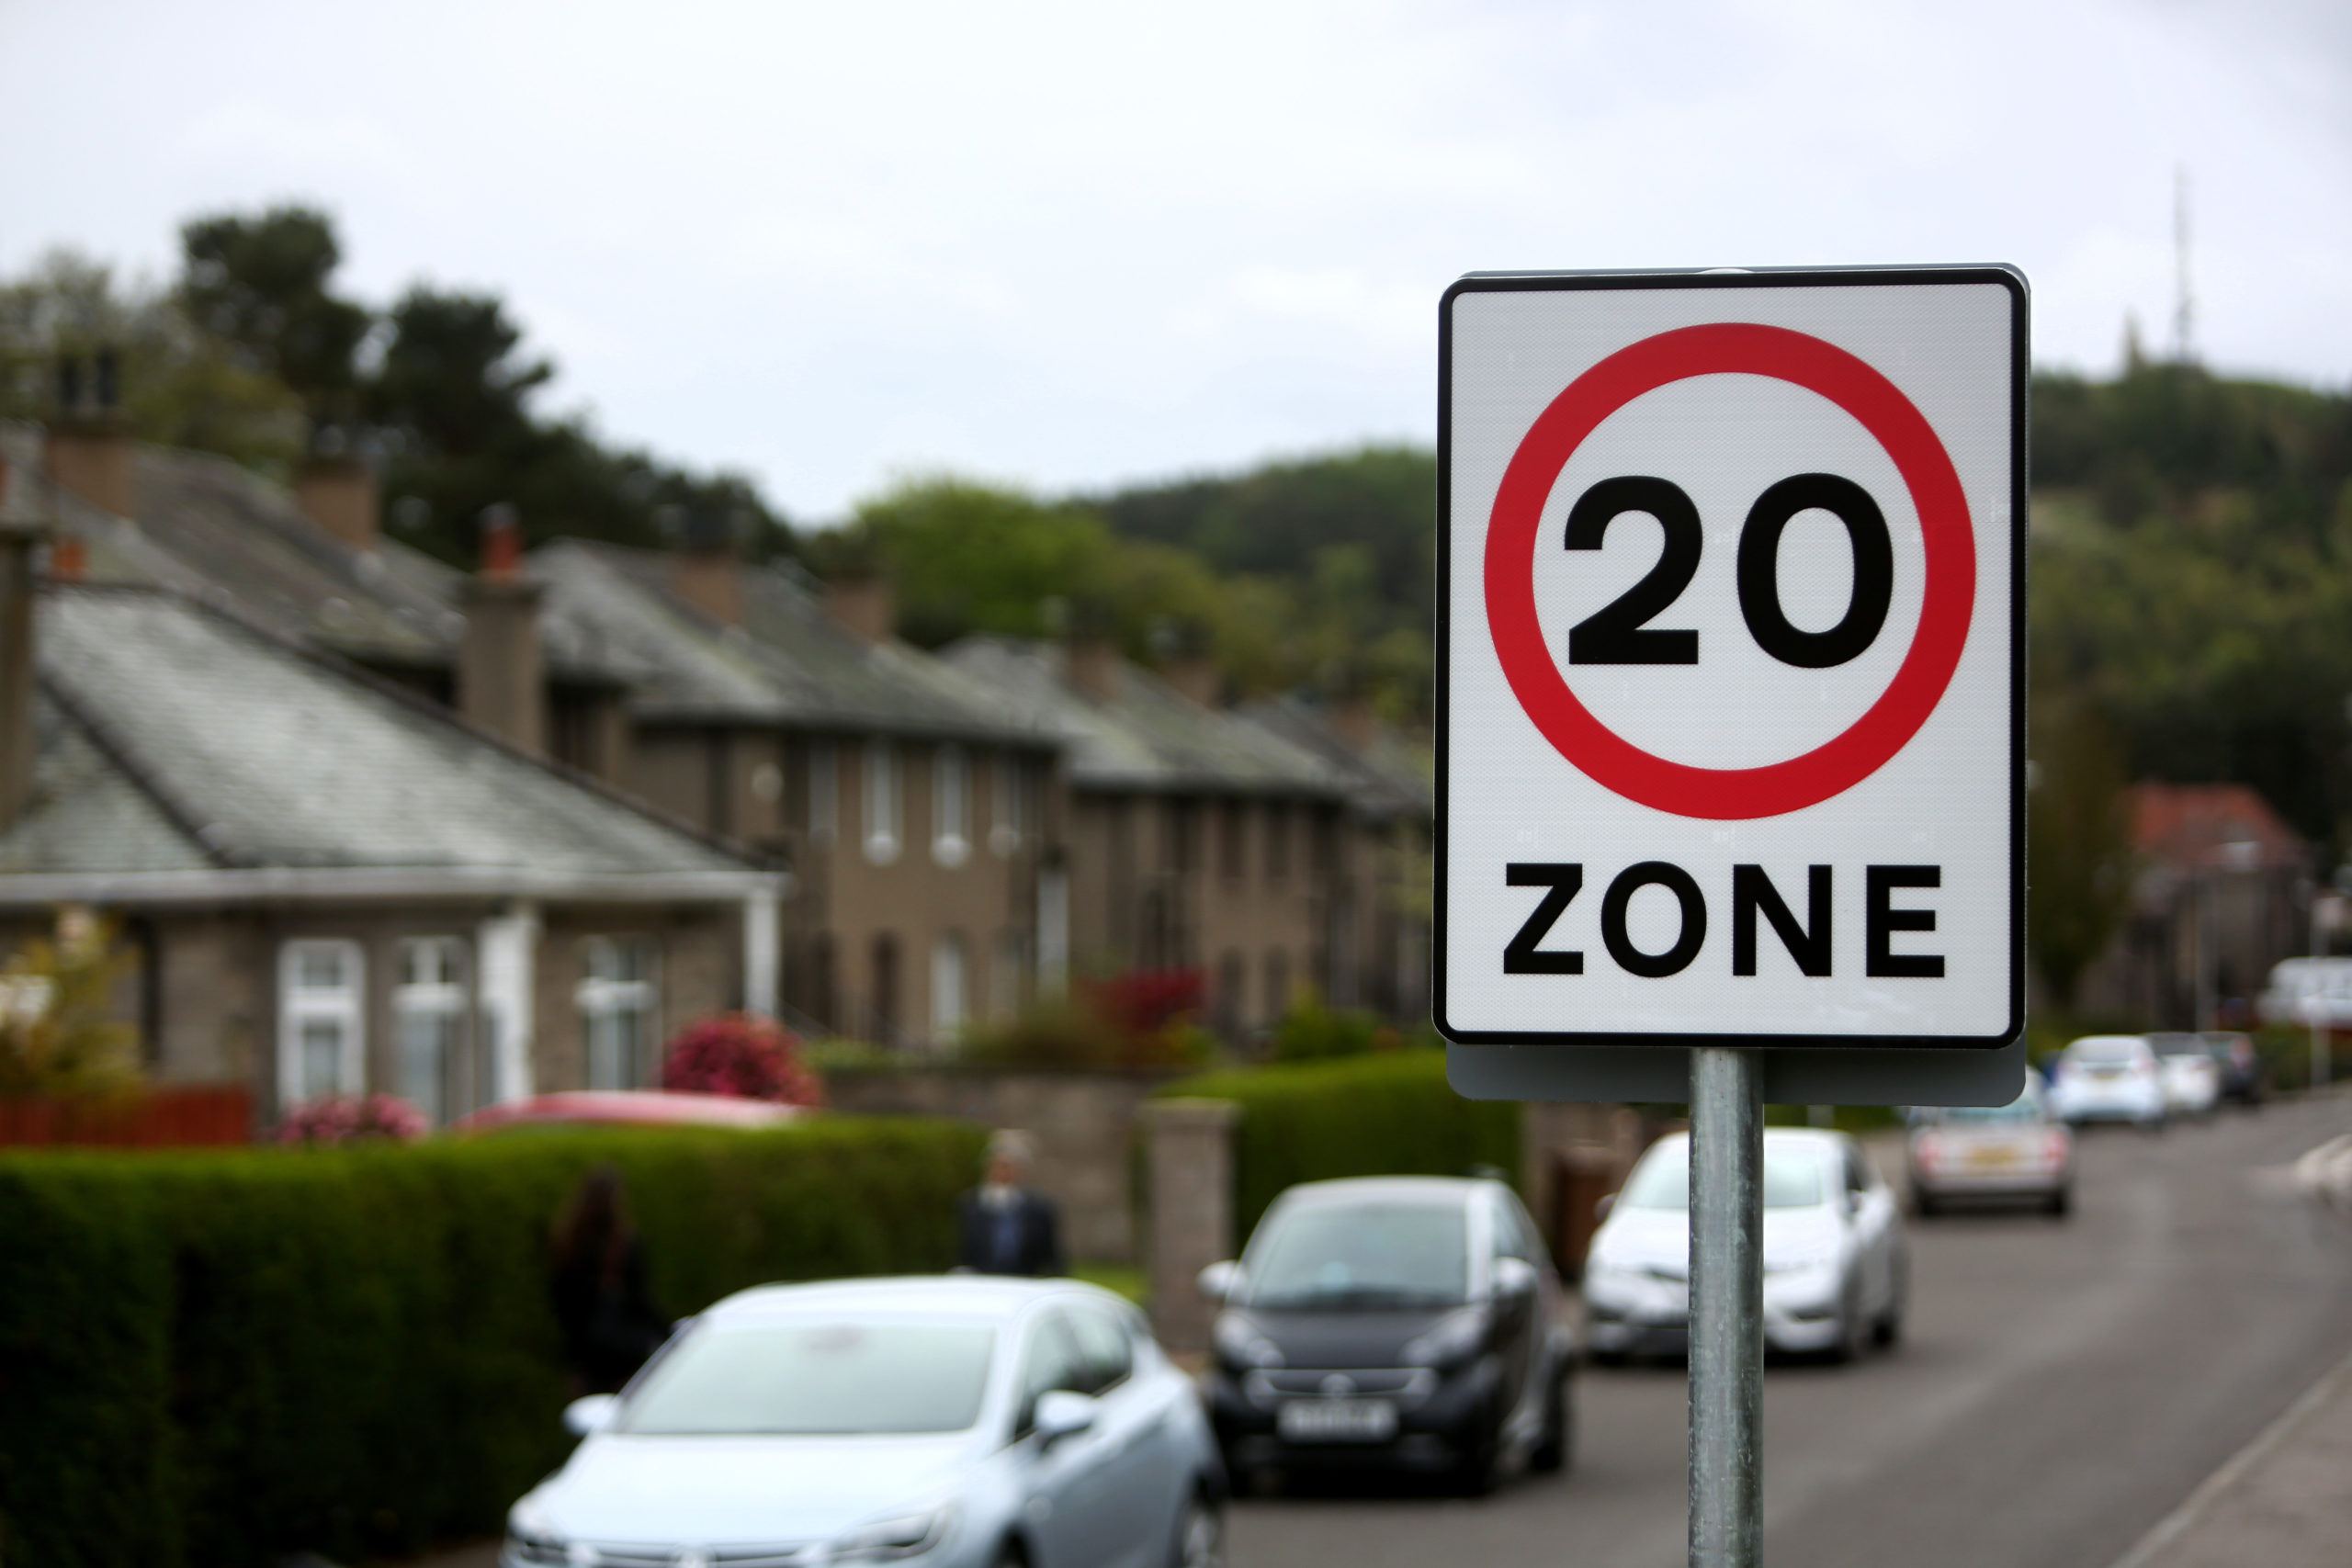 Trials of a lower 20 mph speed limit have been introducted across Perth and Kinross.